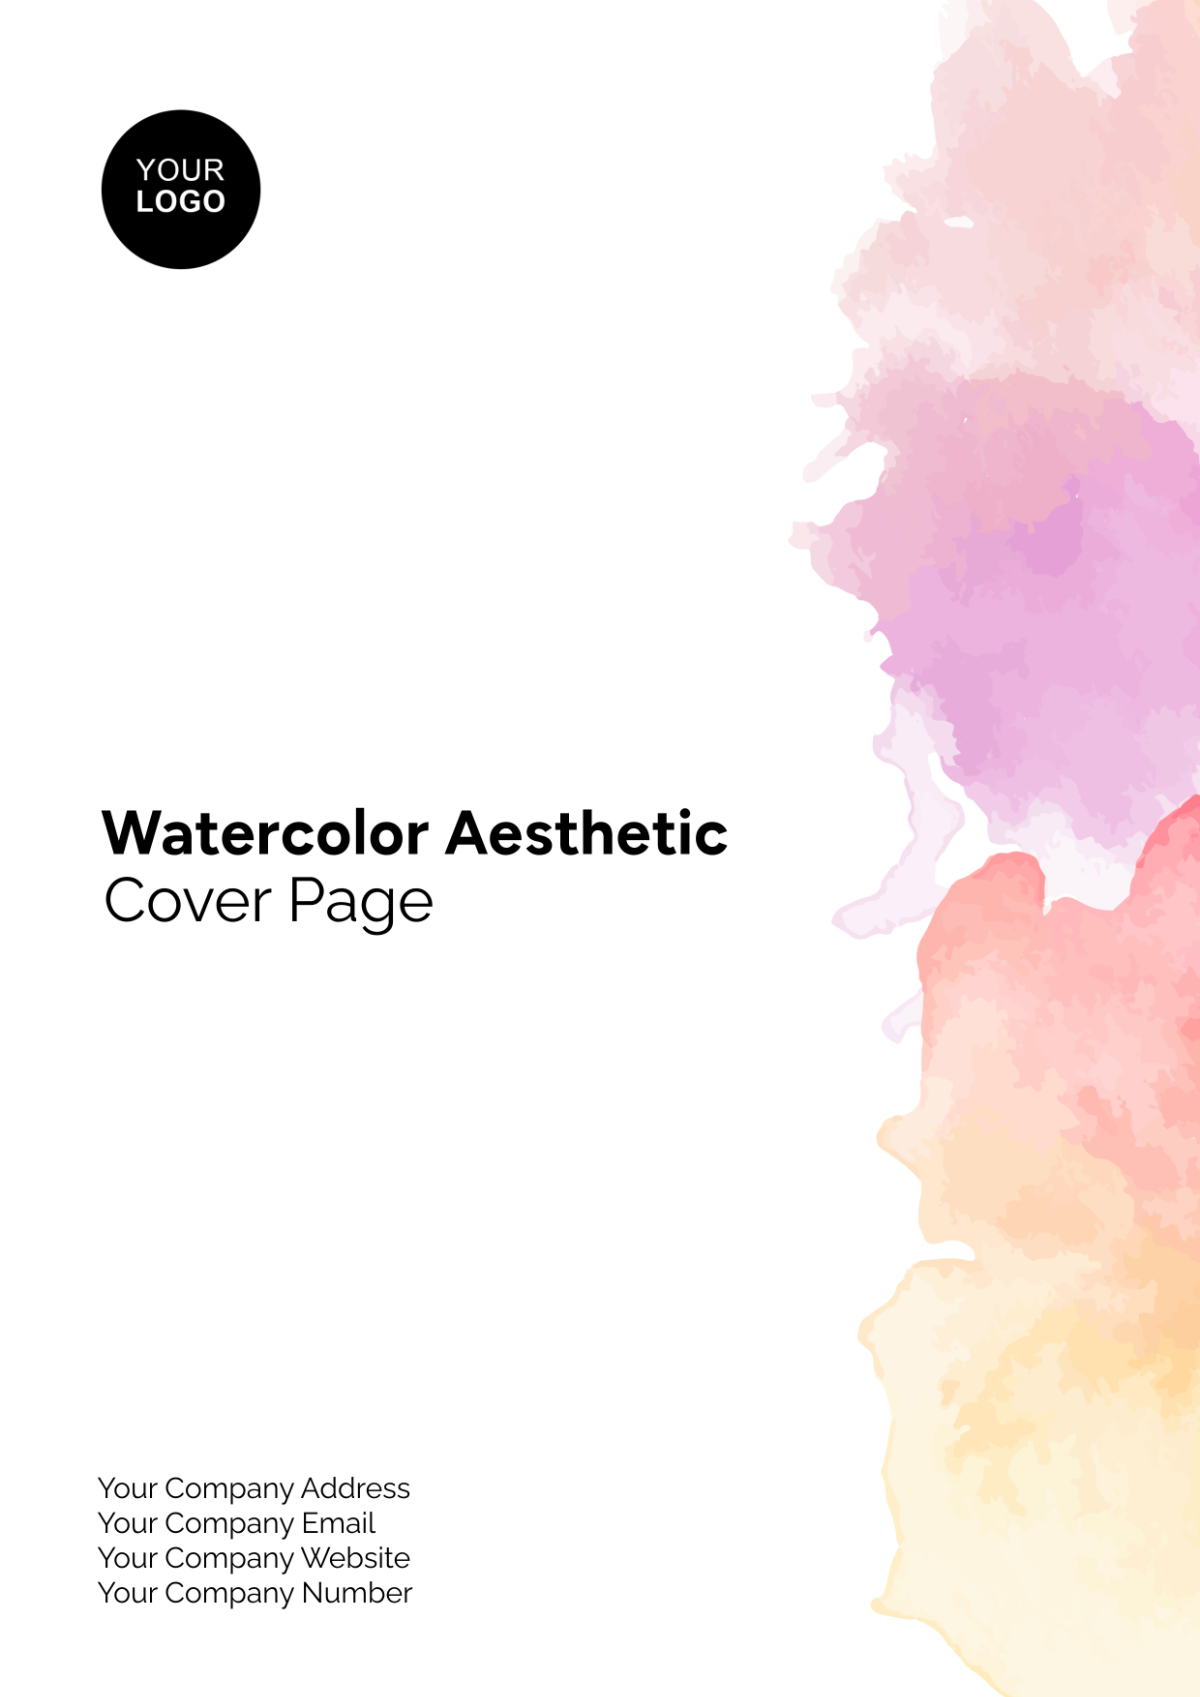 Watercolor Aesthetic Cover Page